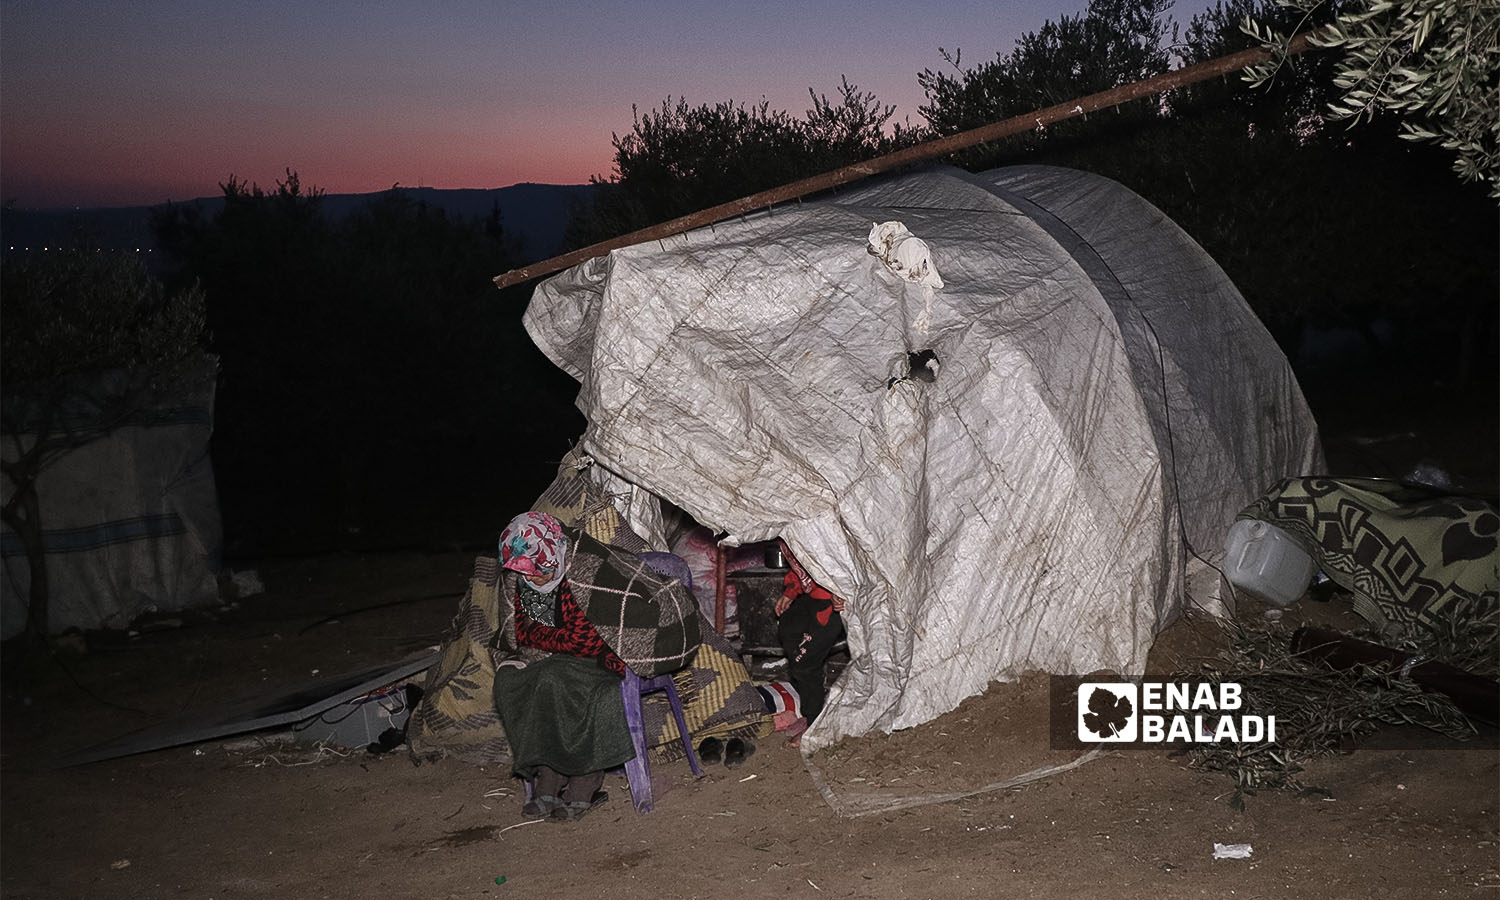 A woman displaced from her home due to the earthquake that hit northwestern Syria spreads out on agricultural land in the village of al-Hamziya in the countryside of Salqin, northern Syria - February 12, 2023 (Enab Baladi/Mohammad Nasan Dabel)